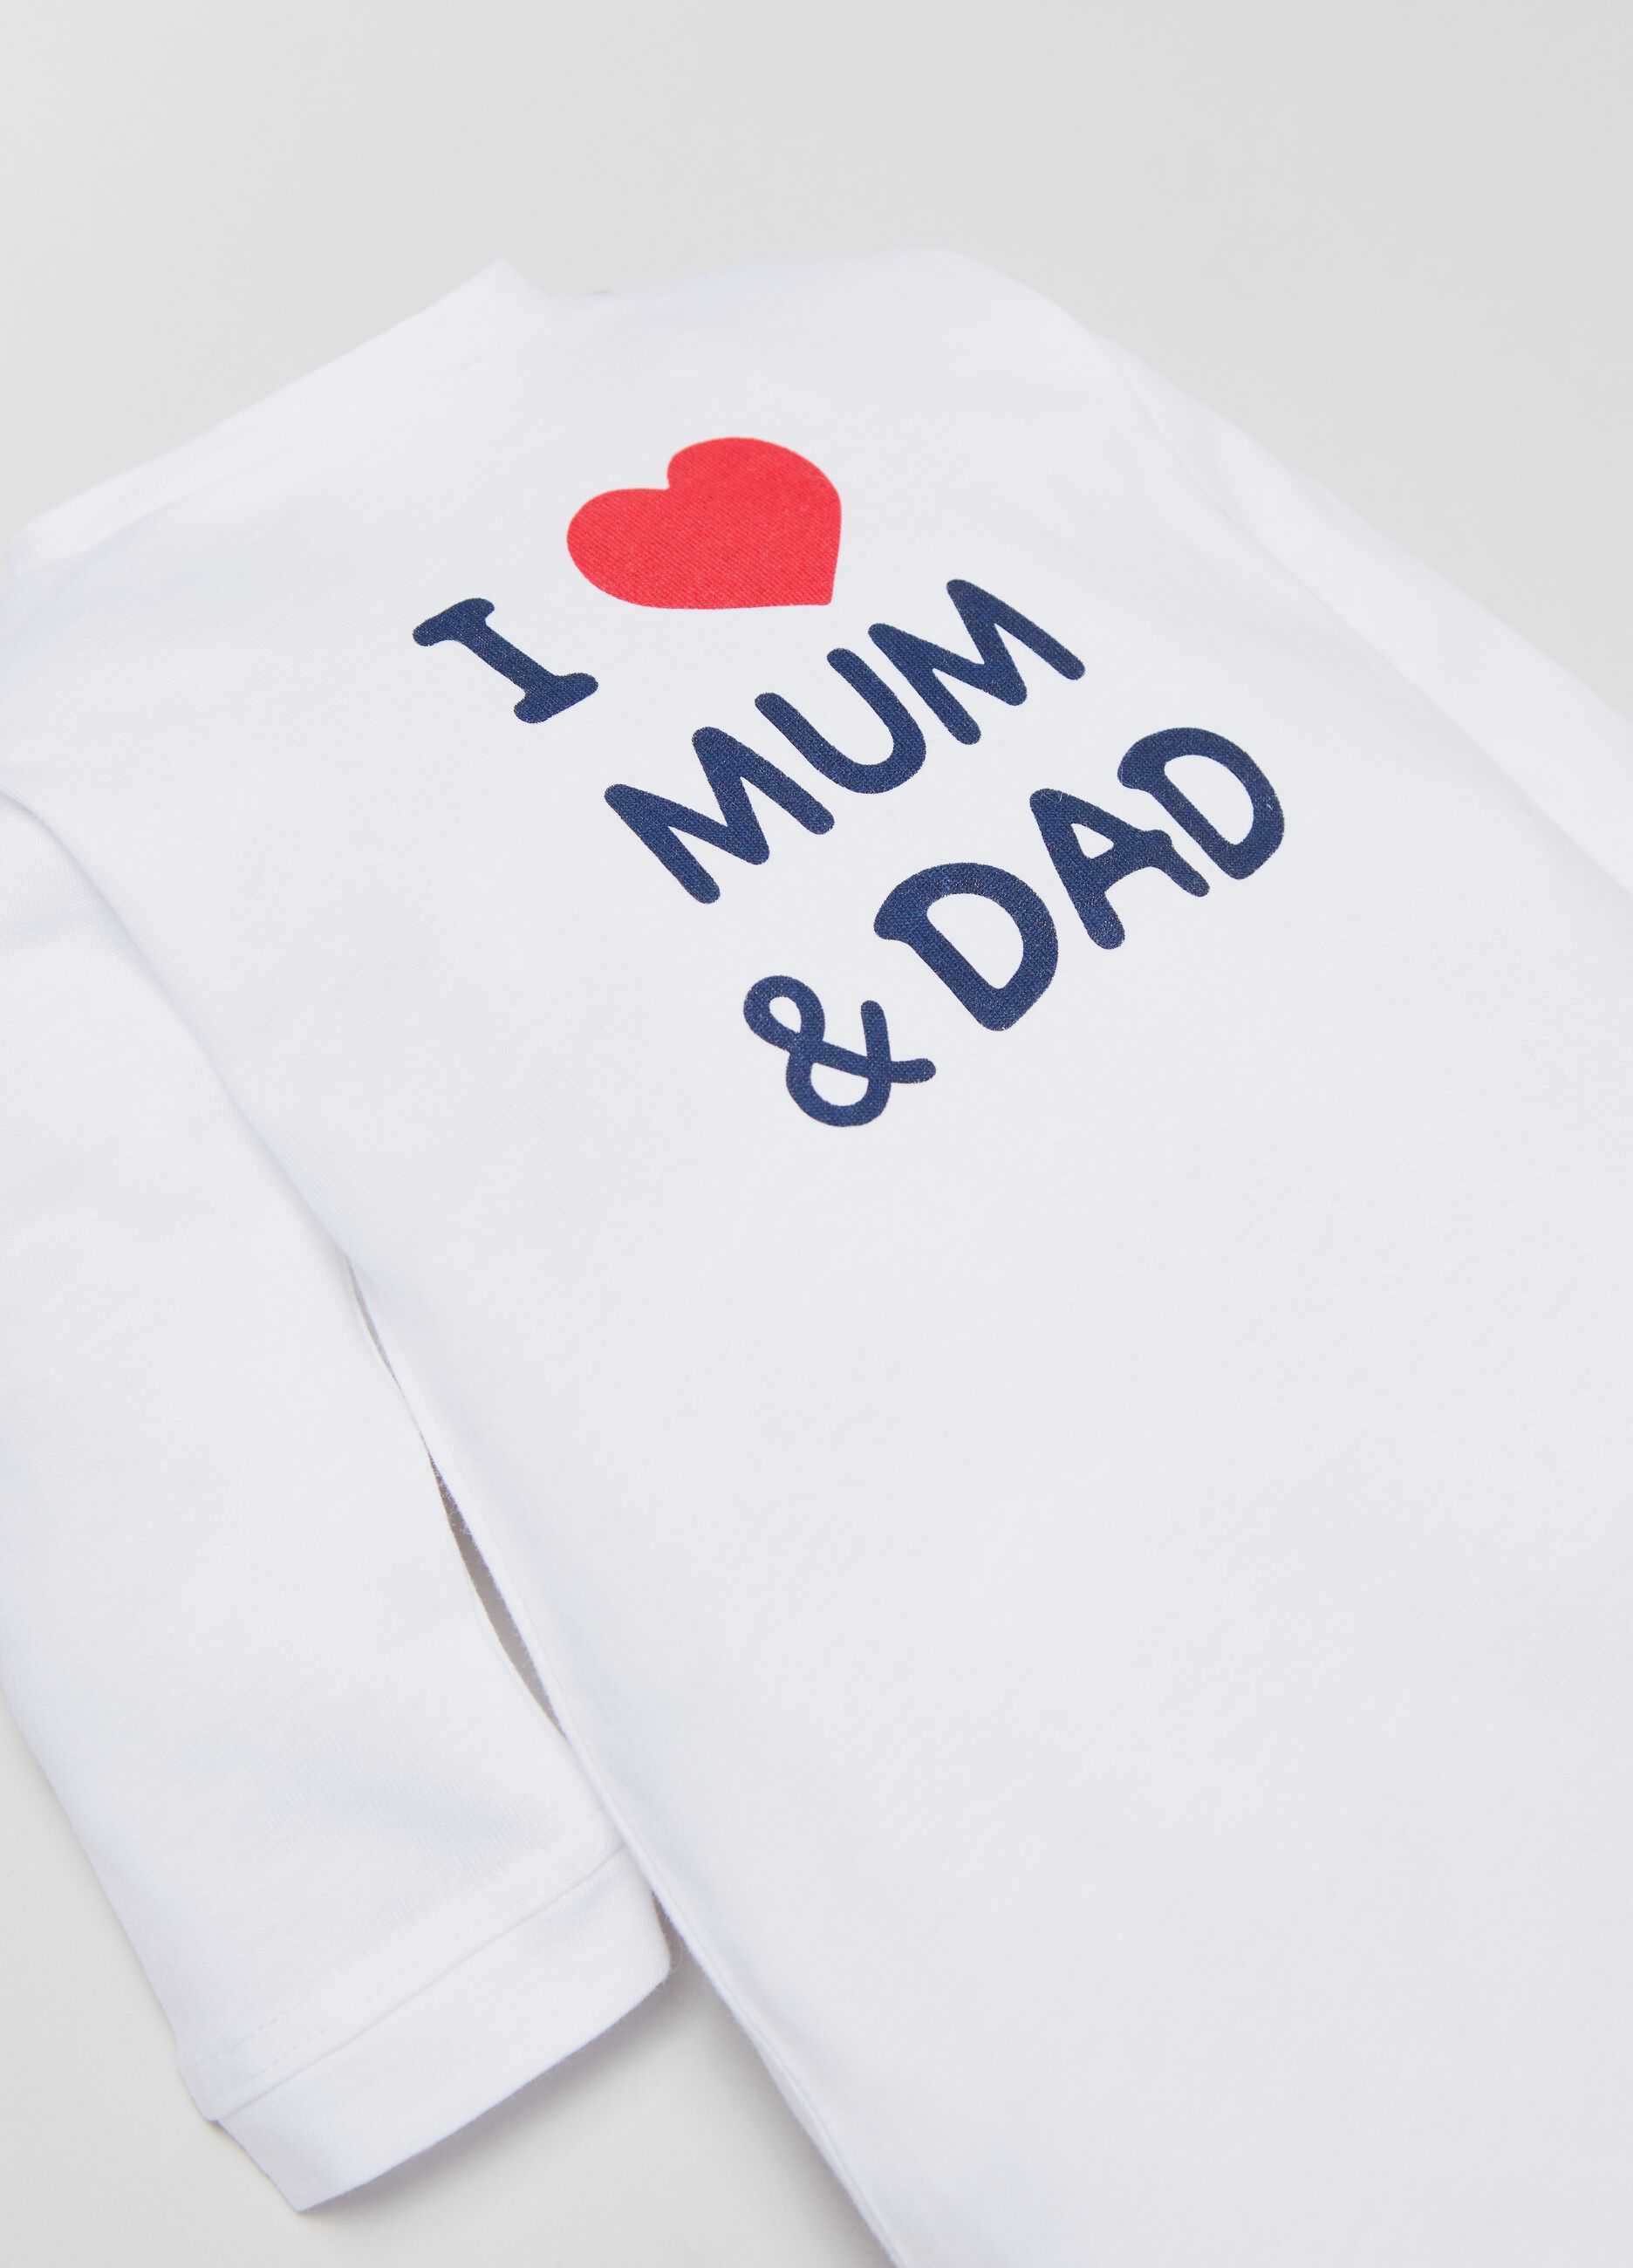 Onesie with feet and I Love Mum & Dad print